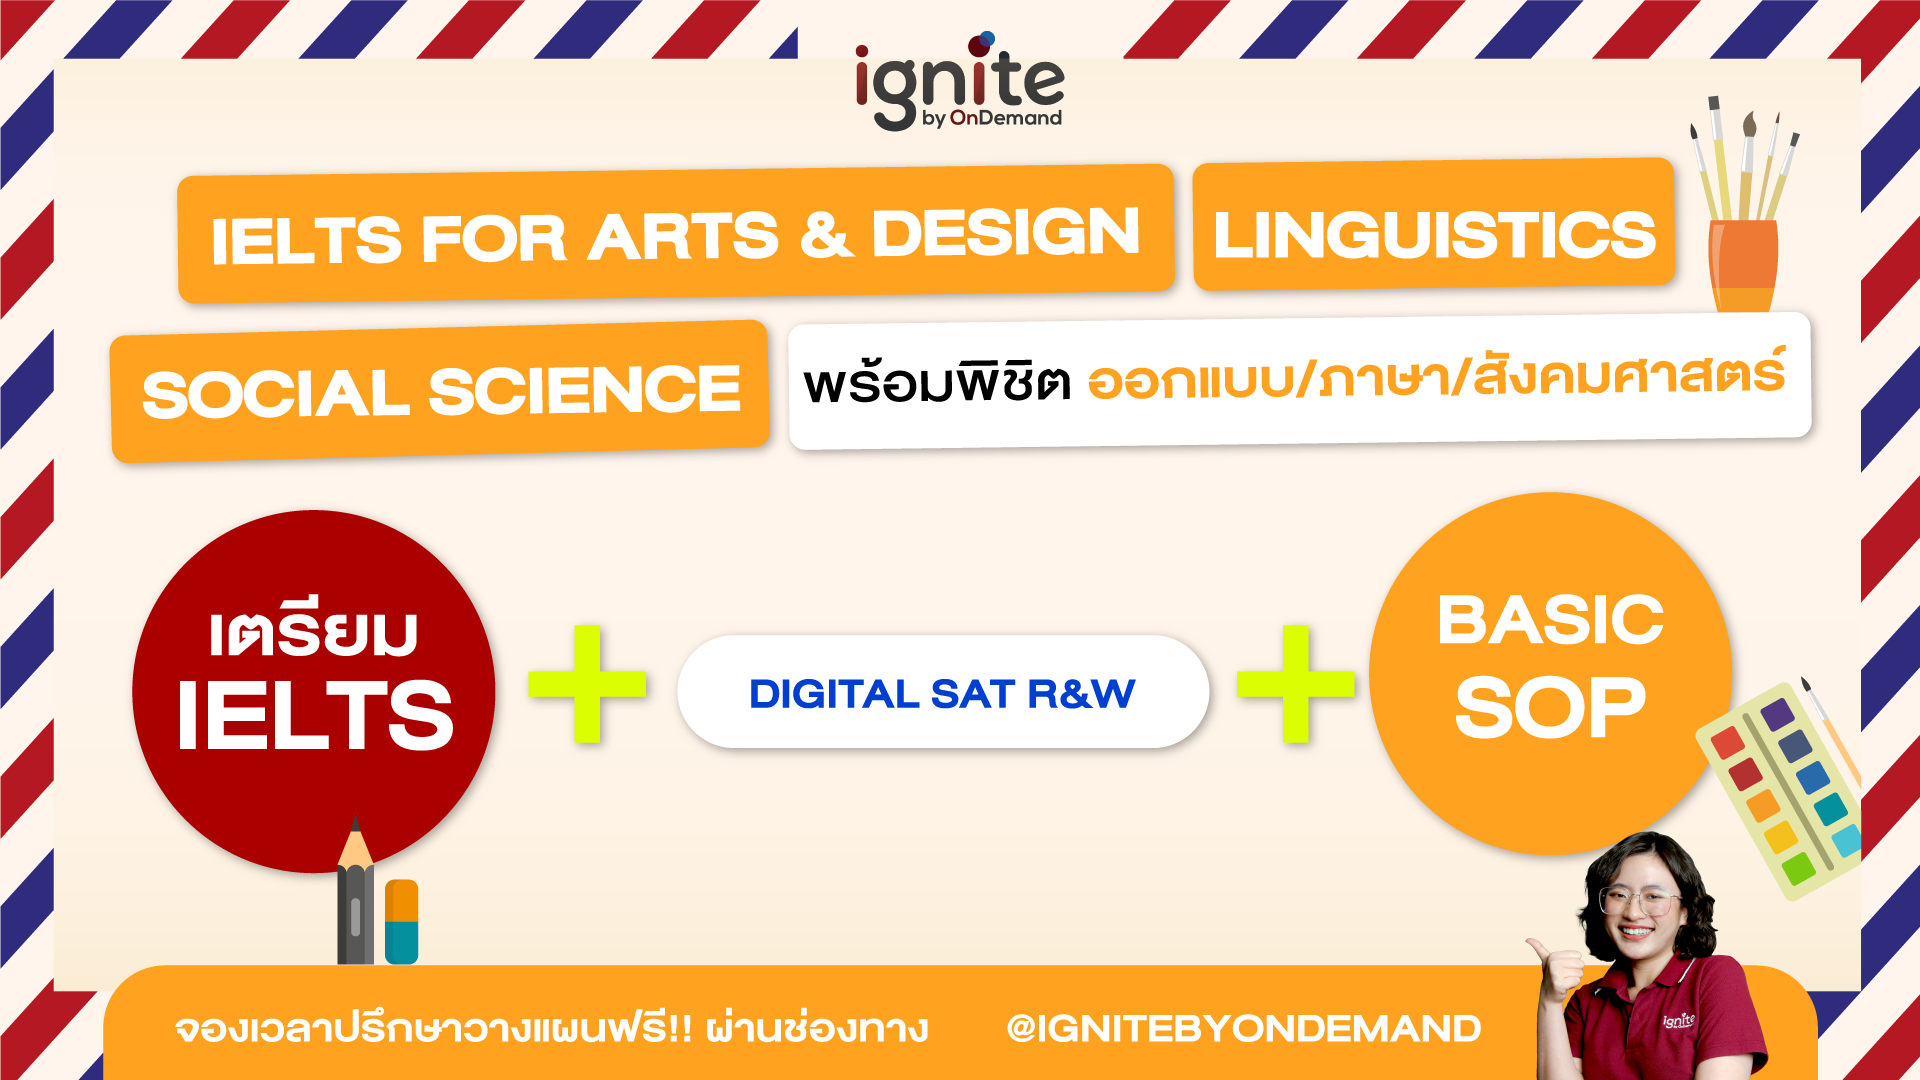 ielts for arts - ignite by ondemand